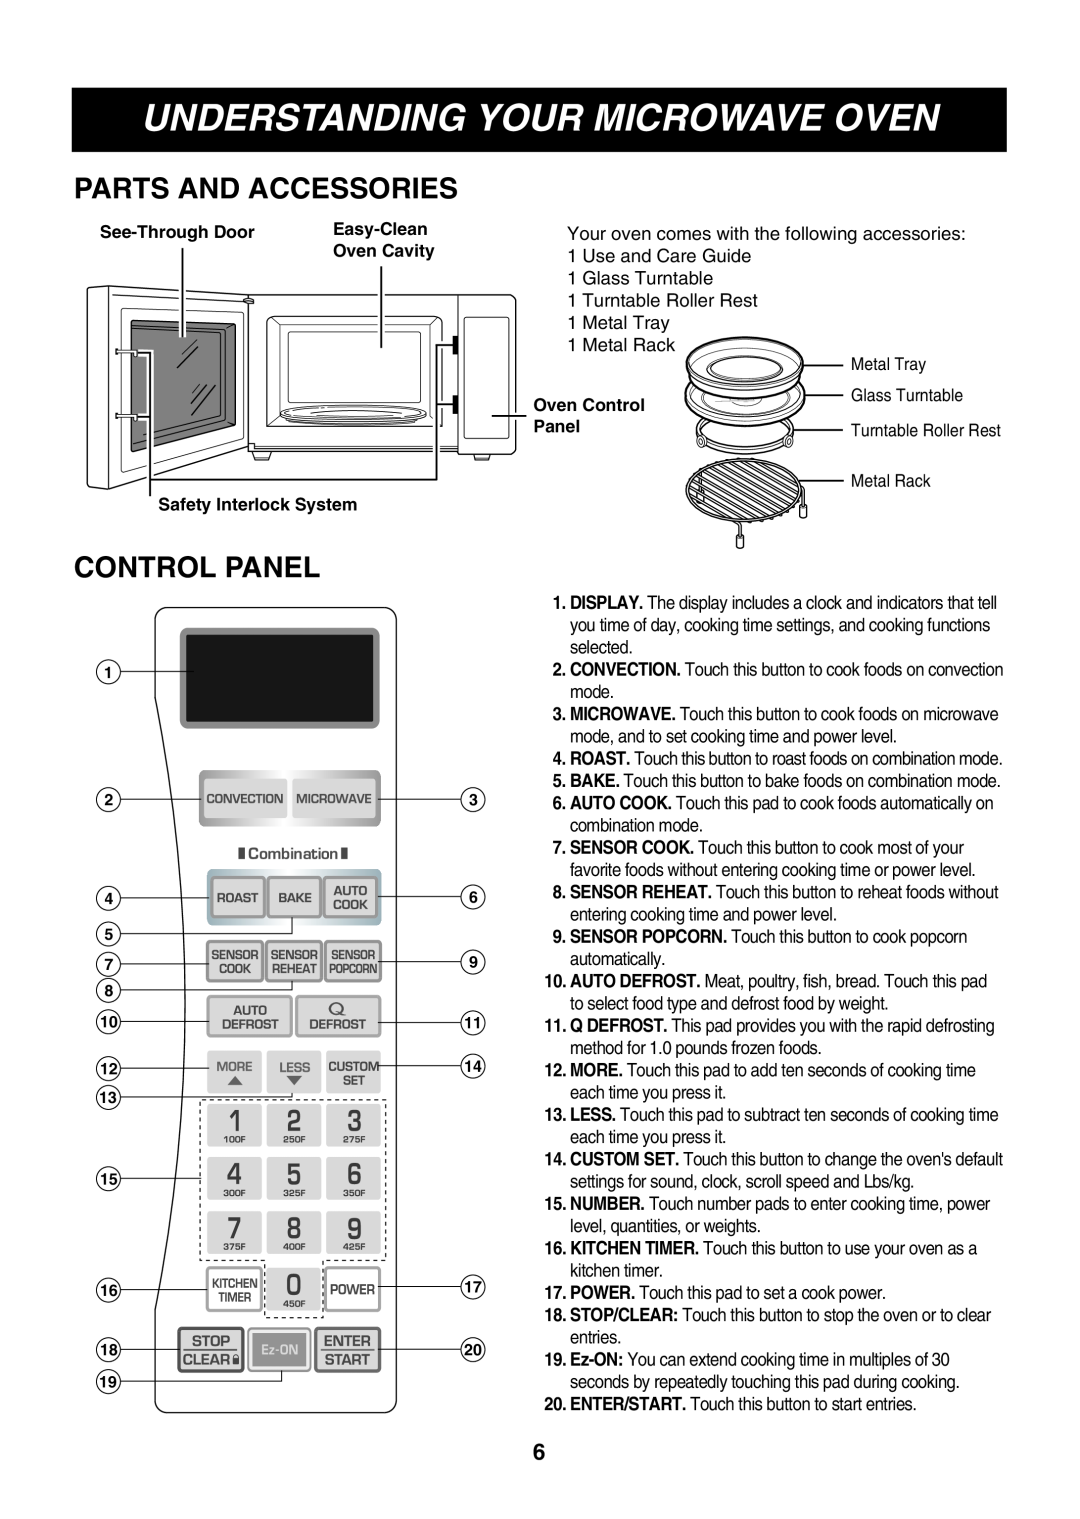 LG Electronics LMH1017CVB, LMH1017CVST, LMH1017CVW Parts And Accessories, Control Panel, Understanding Your Microwave Oven 